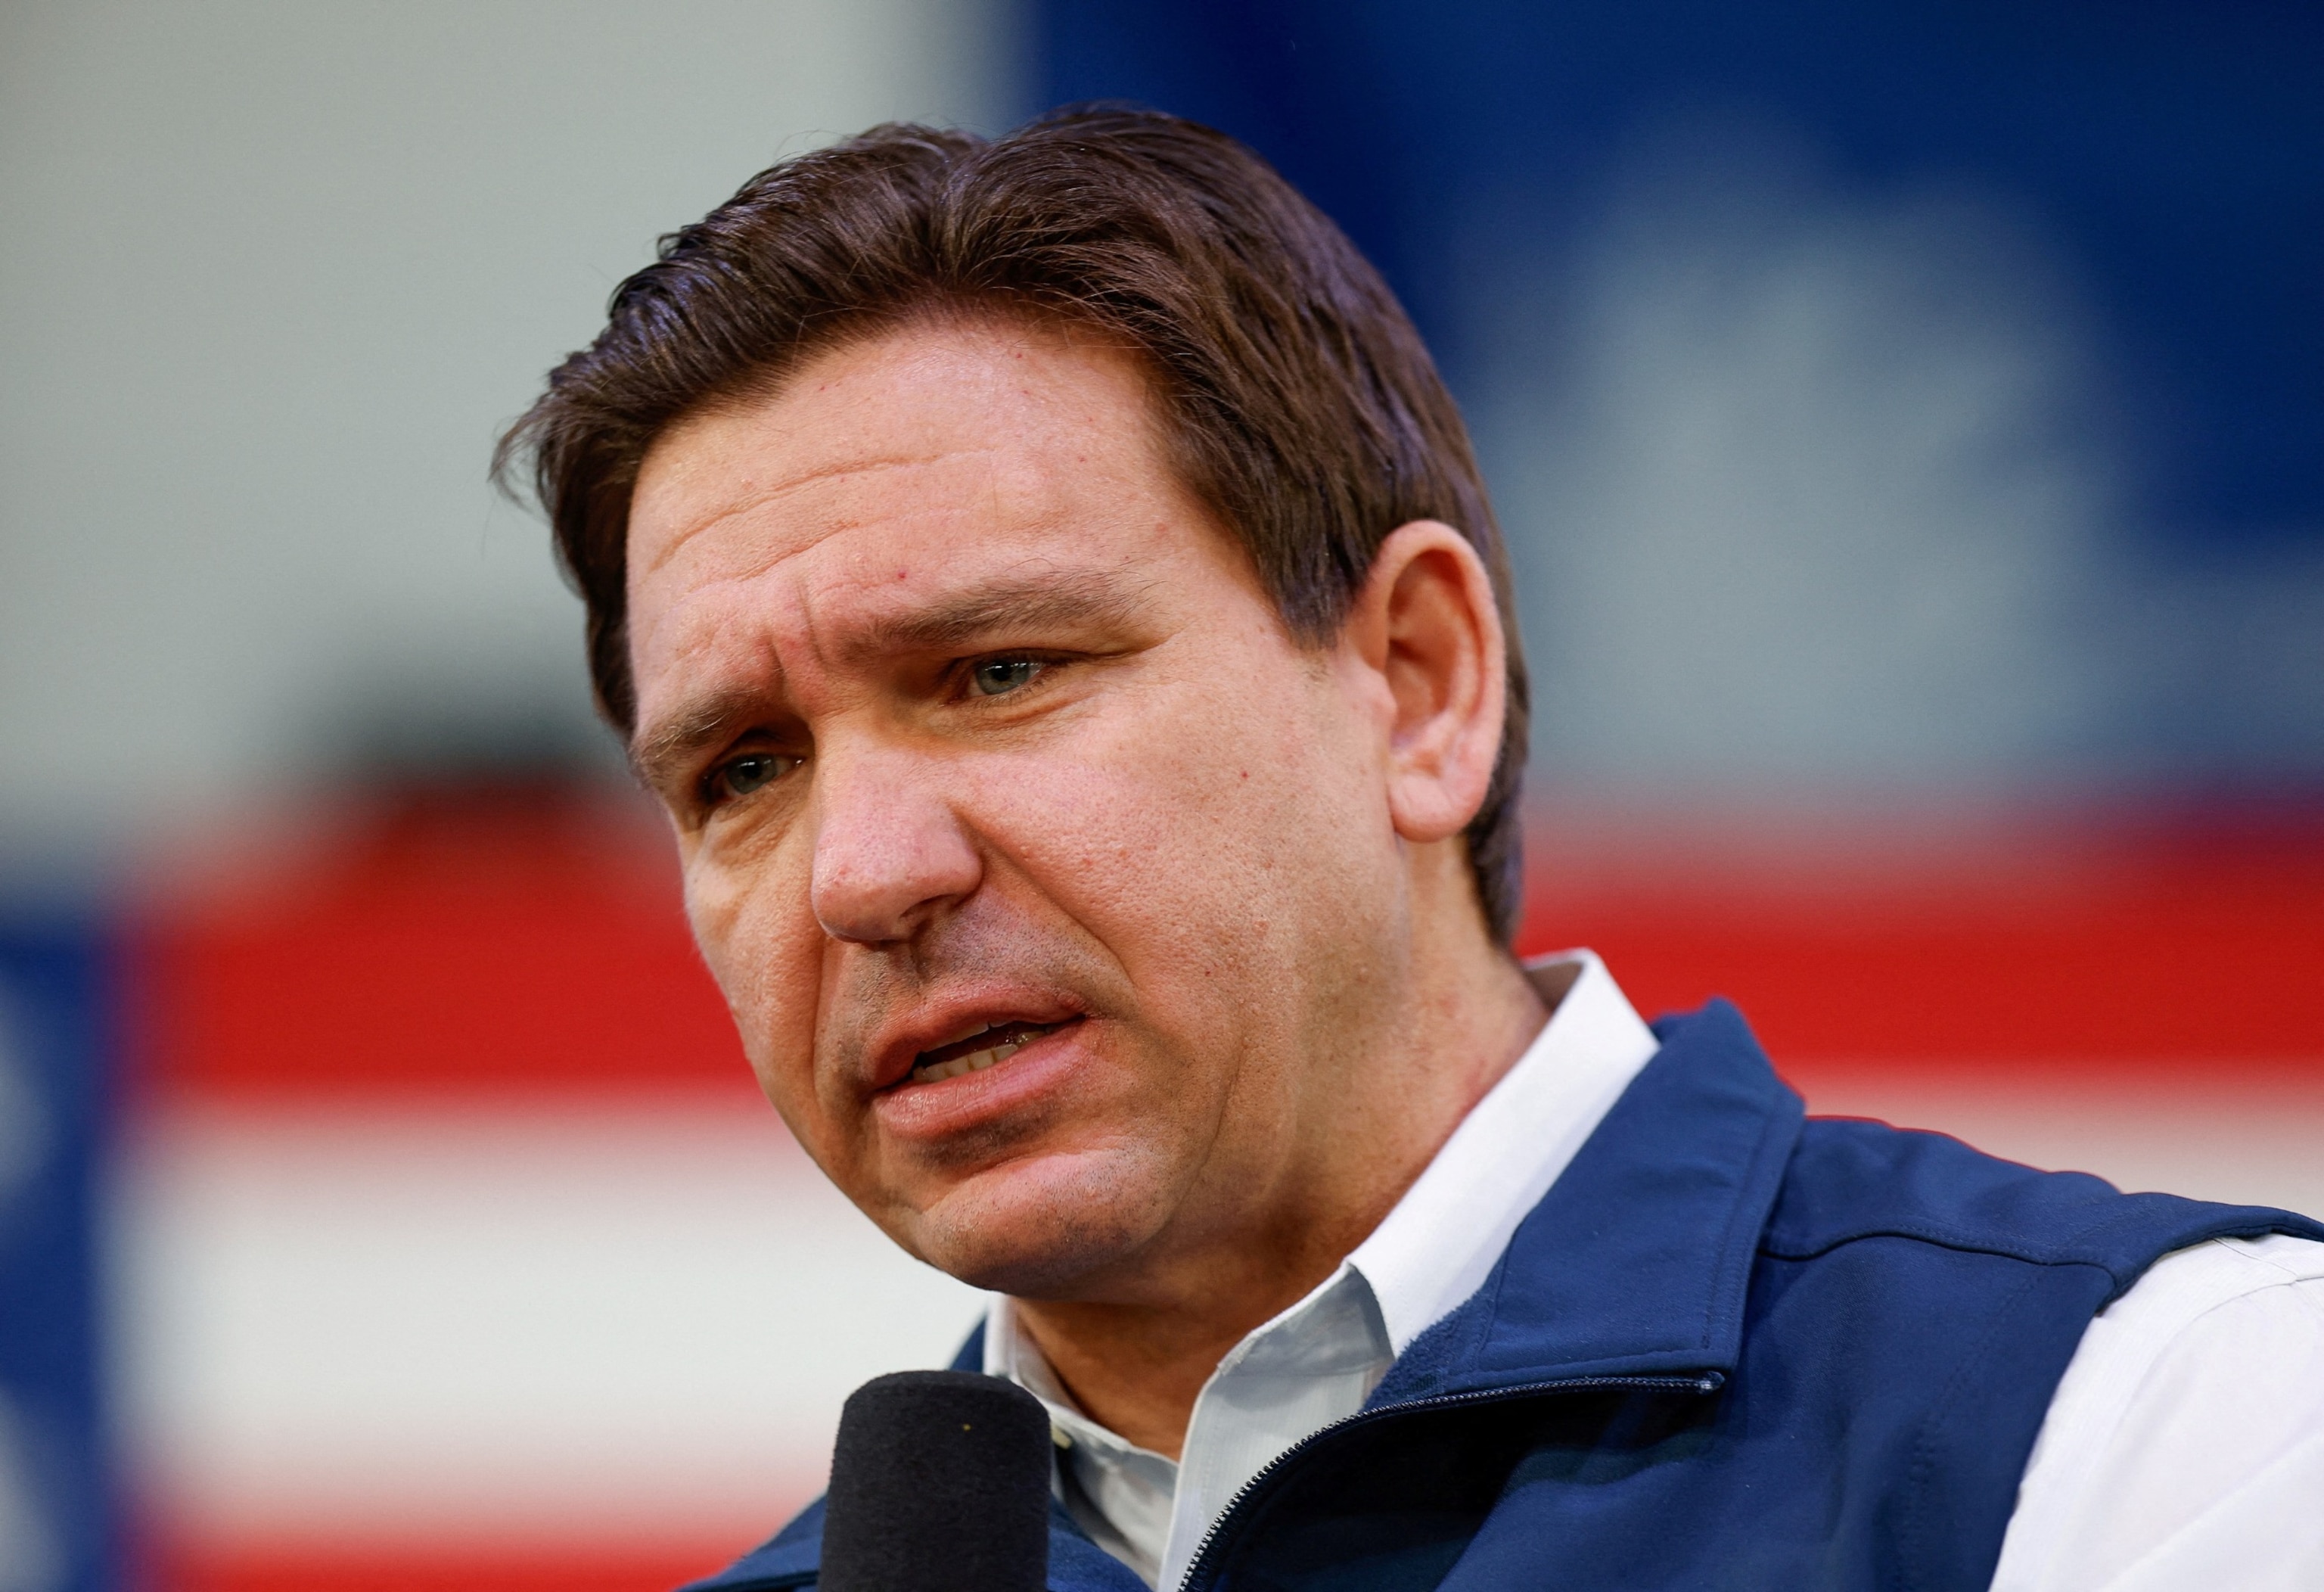 PHOTO: Florida Governor Ron DeSantis speaks during a campaign visit ahead of the South Carolina presidential primary in Myrtle Beach, S.C., Jan. 20, 2024. 